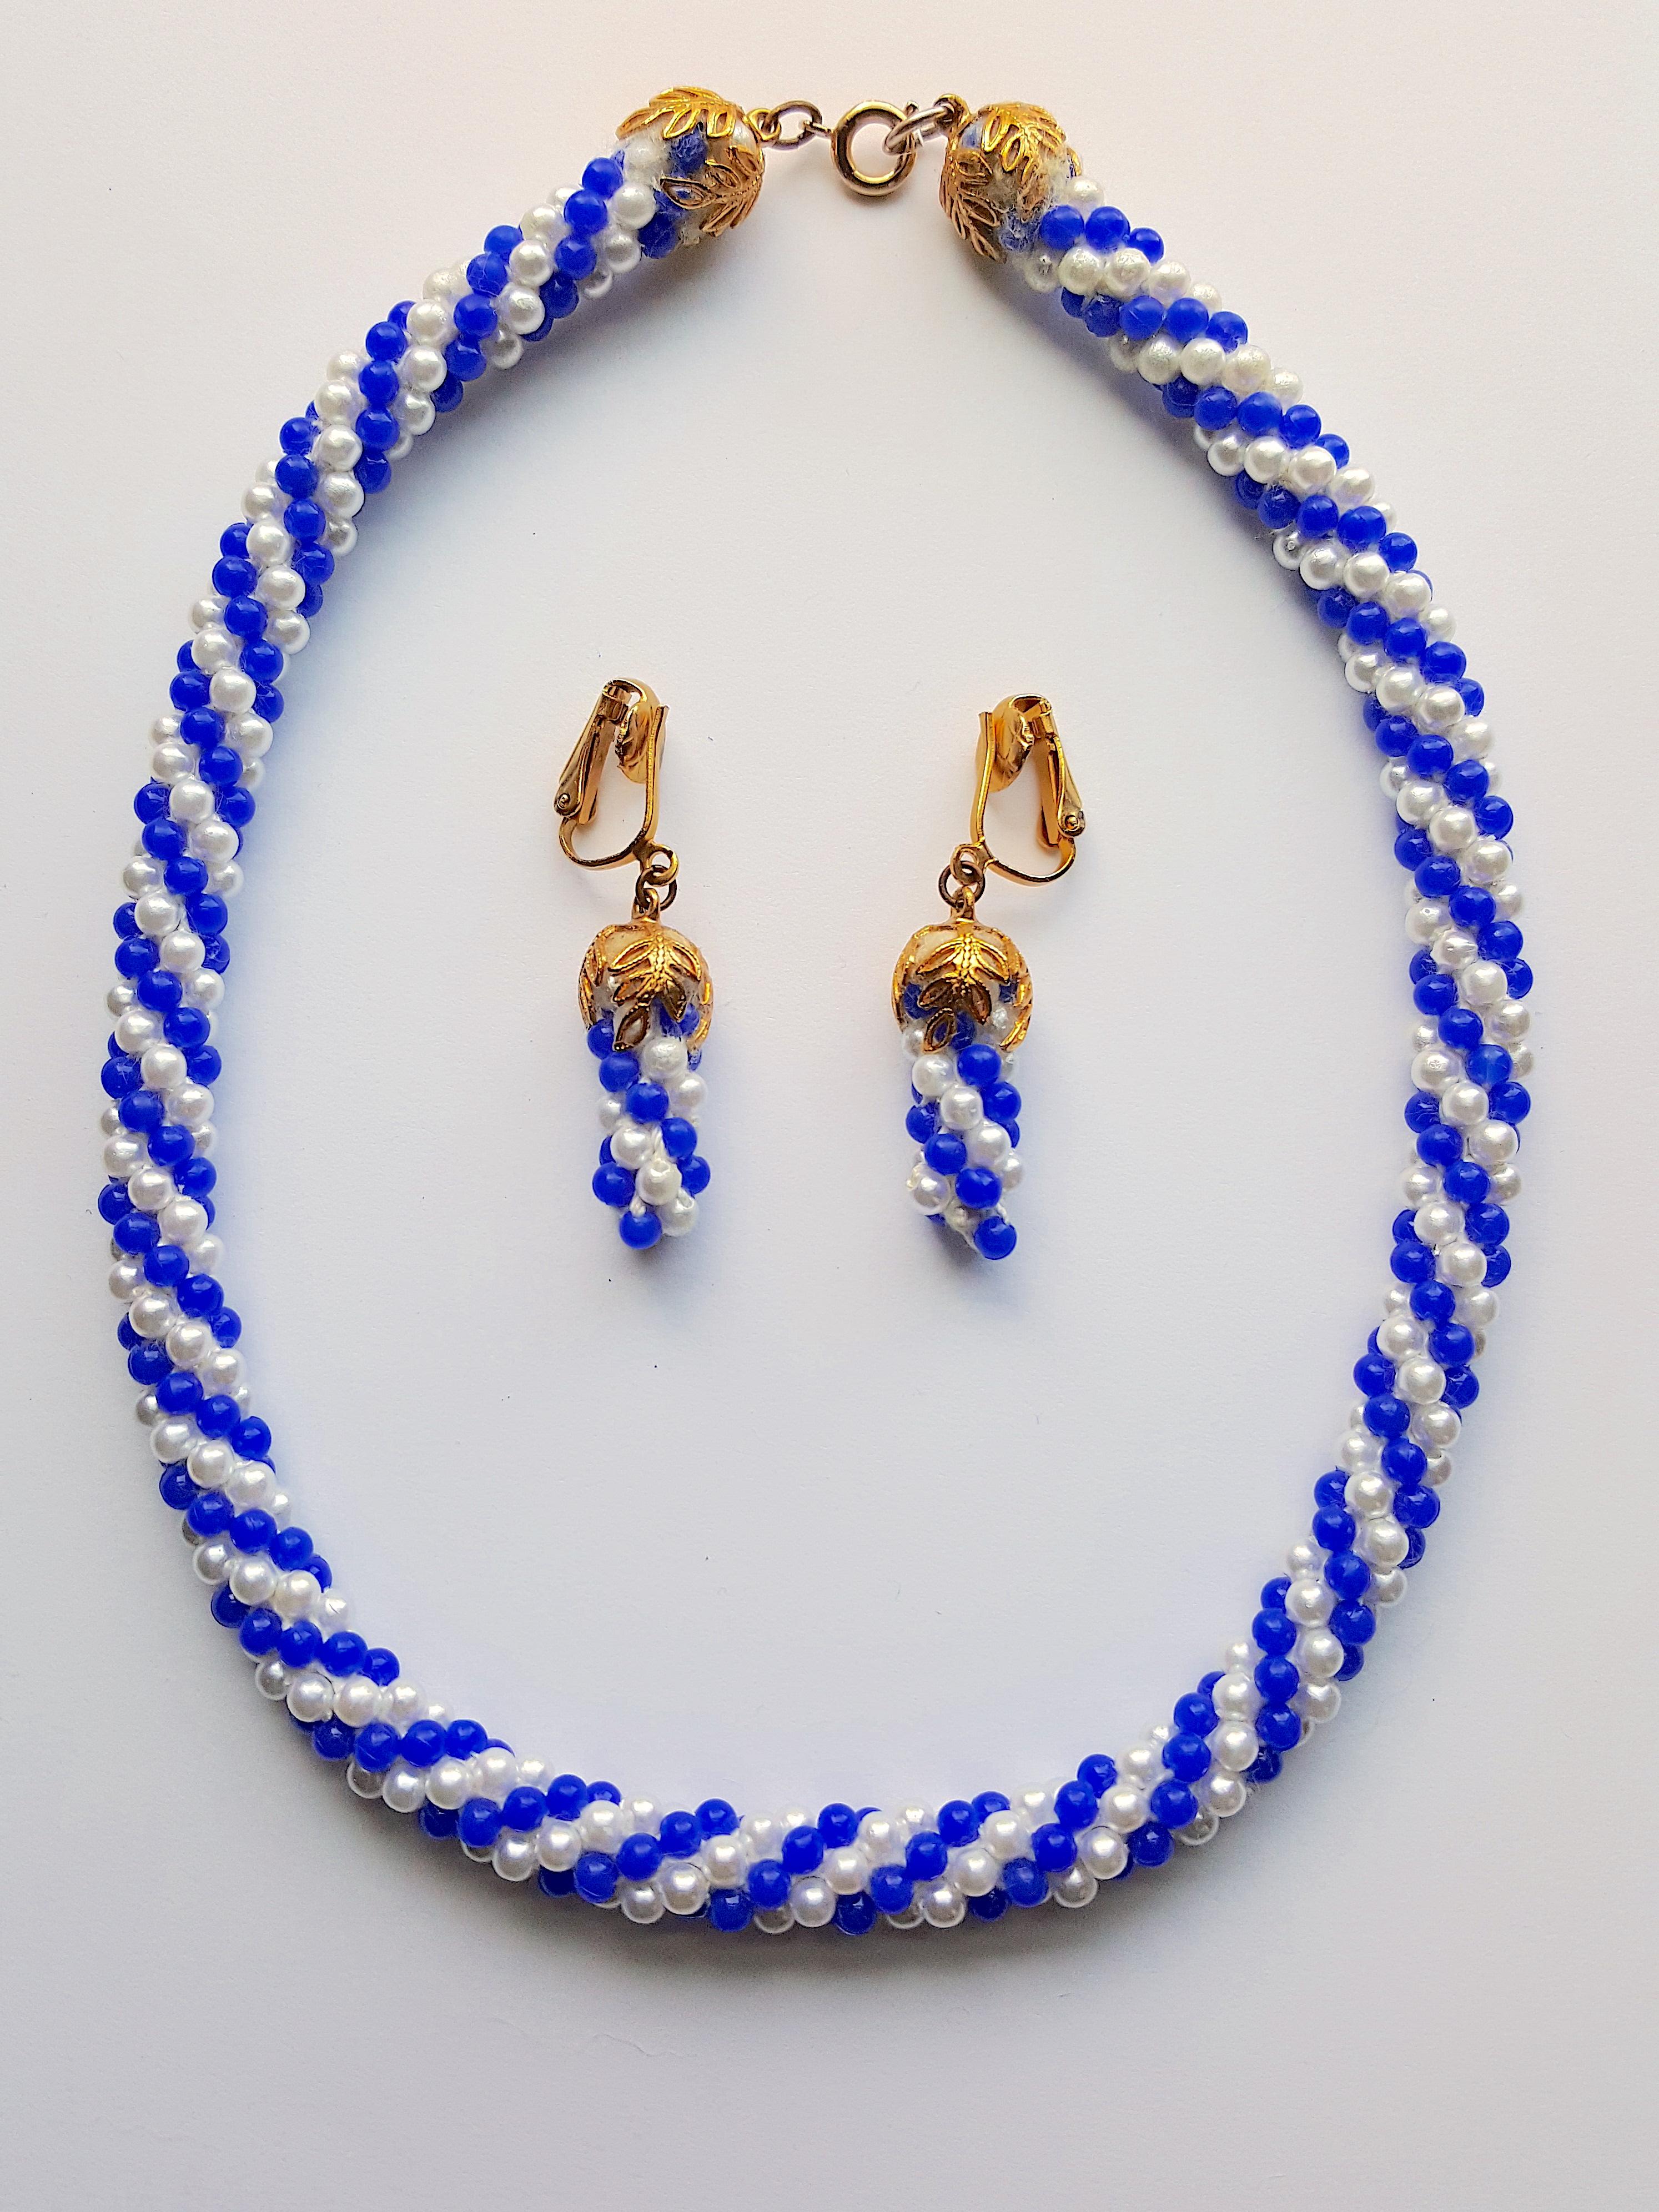 During the Art Deco period, Miriam Haskell's first designer Frank Hess designed this blue-and-white glass-beaded hand-sewn torsade set of dangle earrings and a choker necklace, whose knotted string is capped with their characteristic Russian-gilt